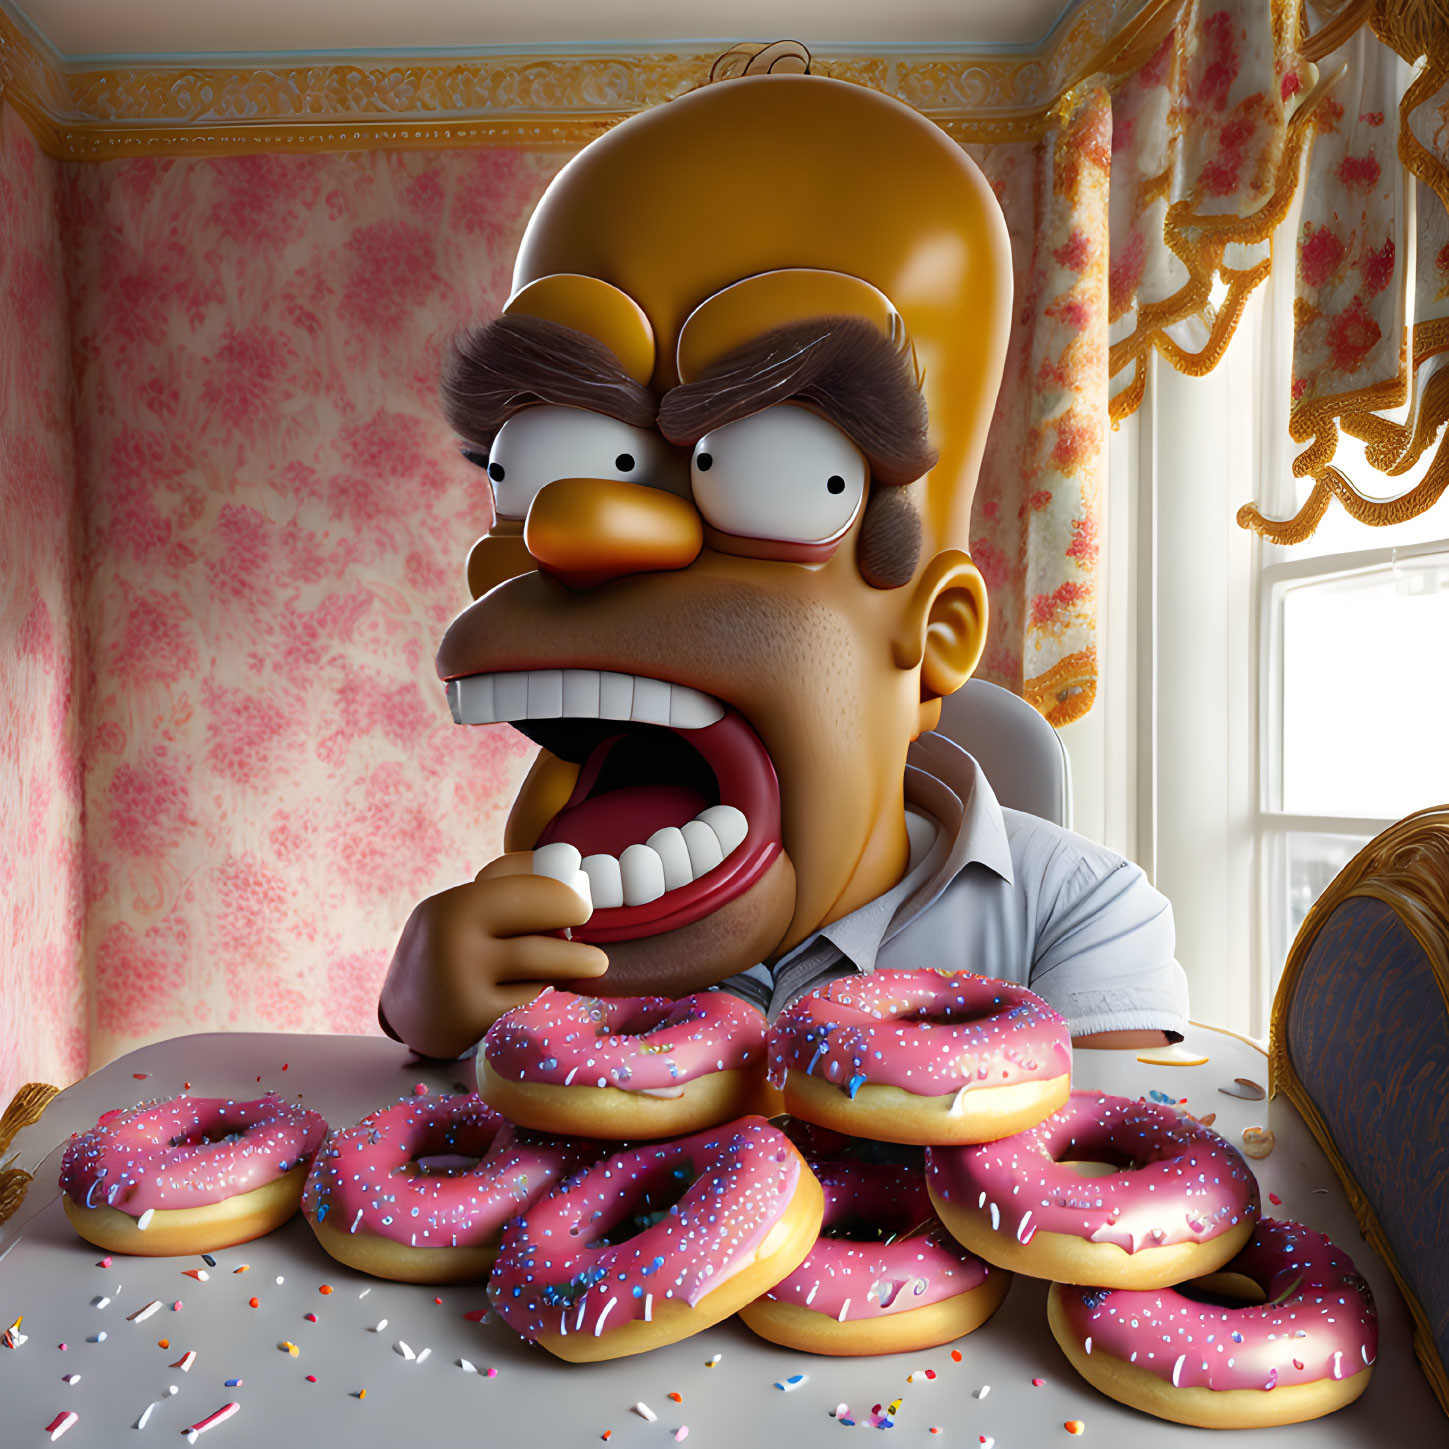 Angry animated character eyeing pink-frosted donuts on ornate table